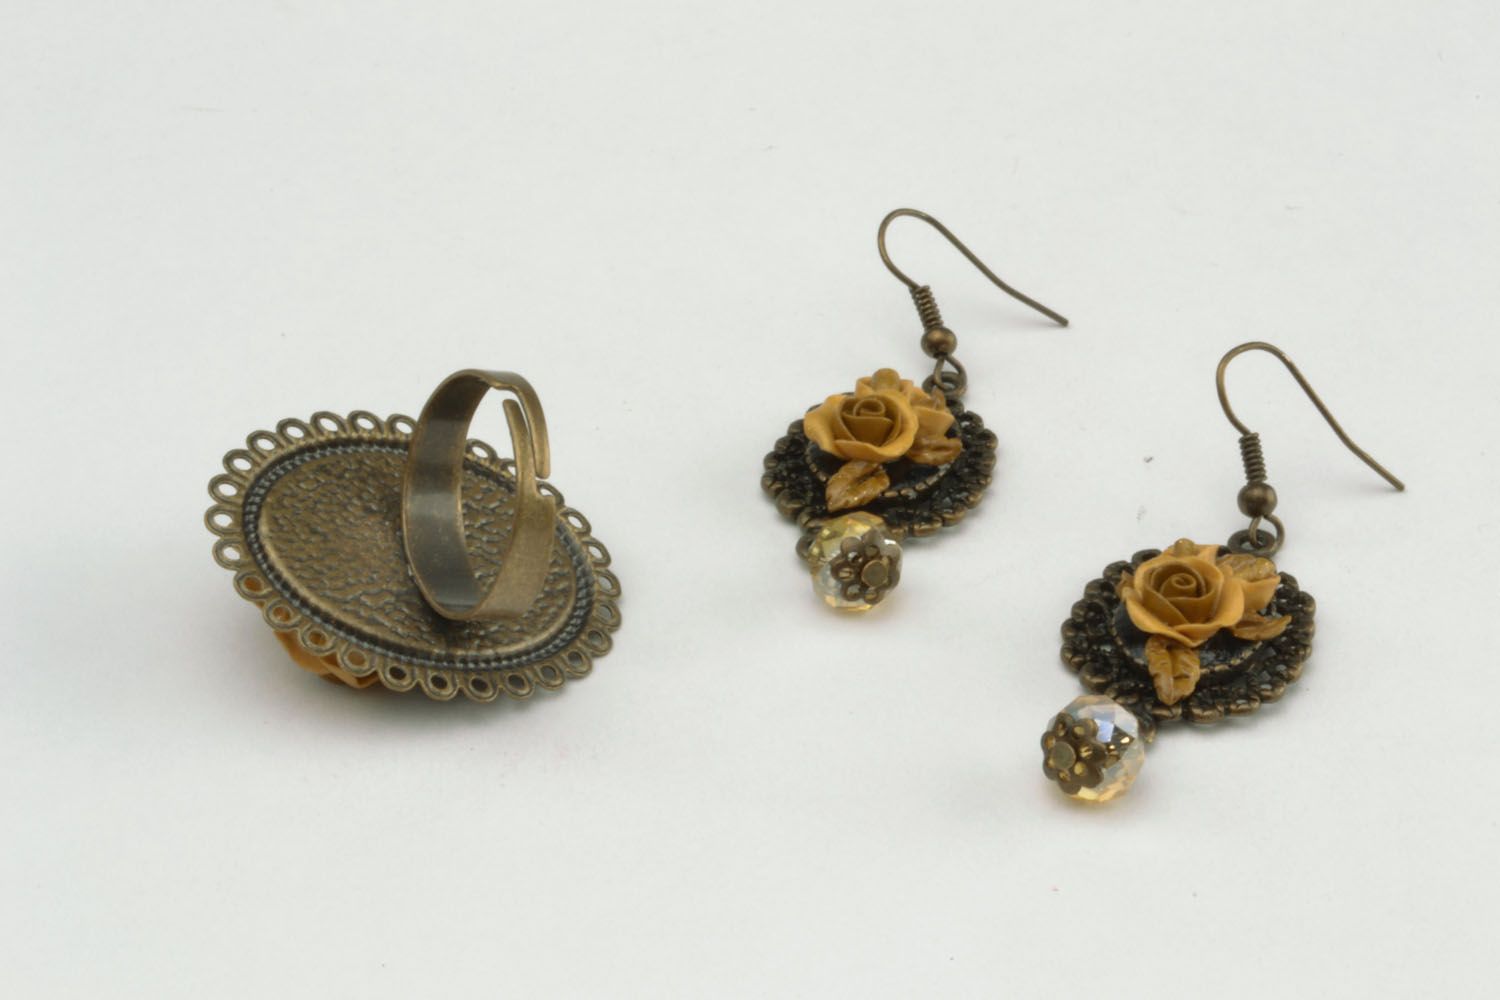 Homemade ring and earrings in vintage style photo 5